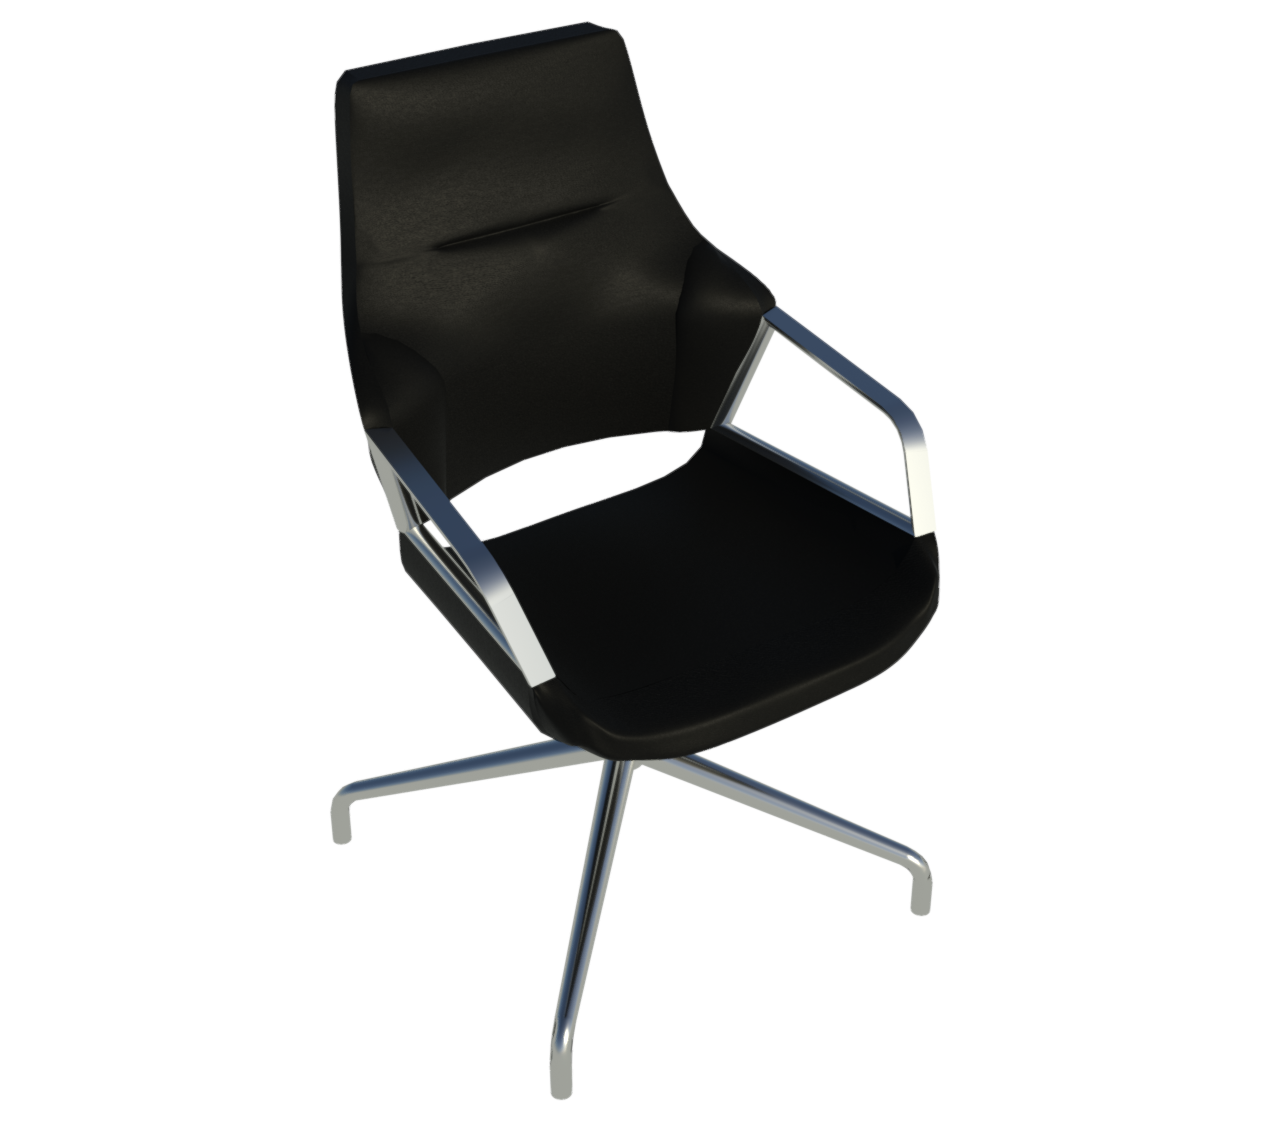 Raytrace of our Graph chair Revit family with black upholstery and bright chromium-plated frame.